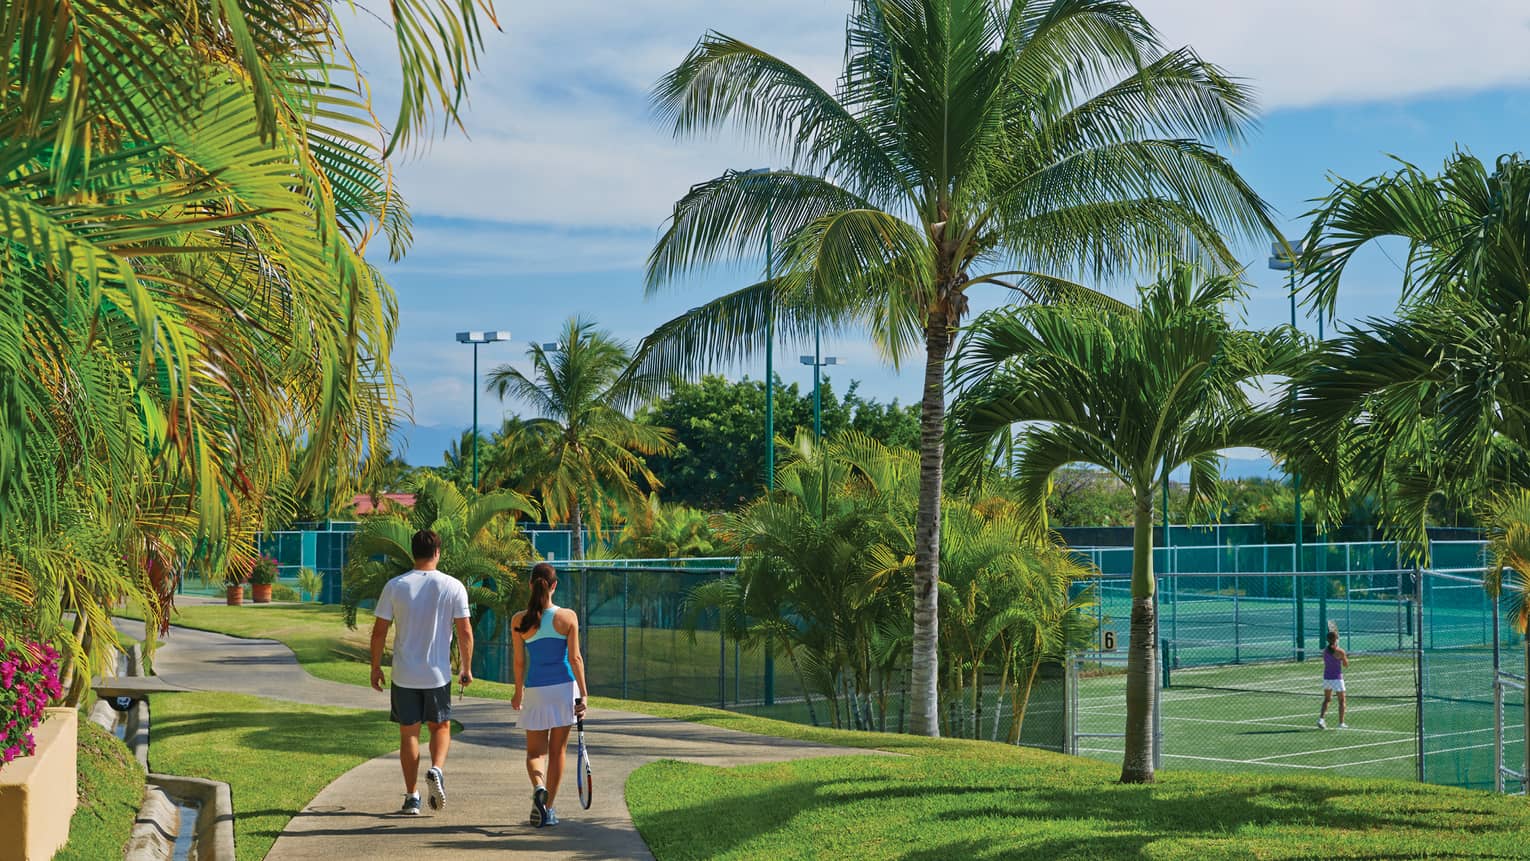 A man and woman walking along a path next to tennis courts and palm trees.